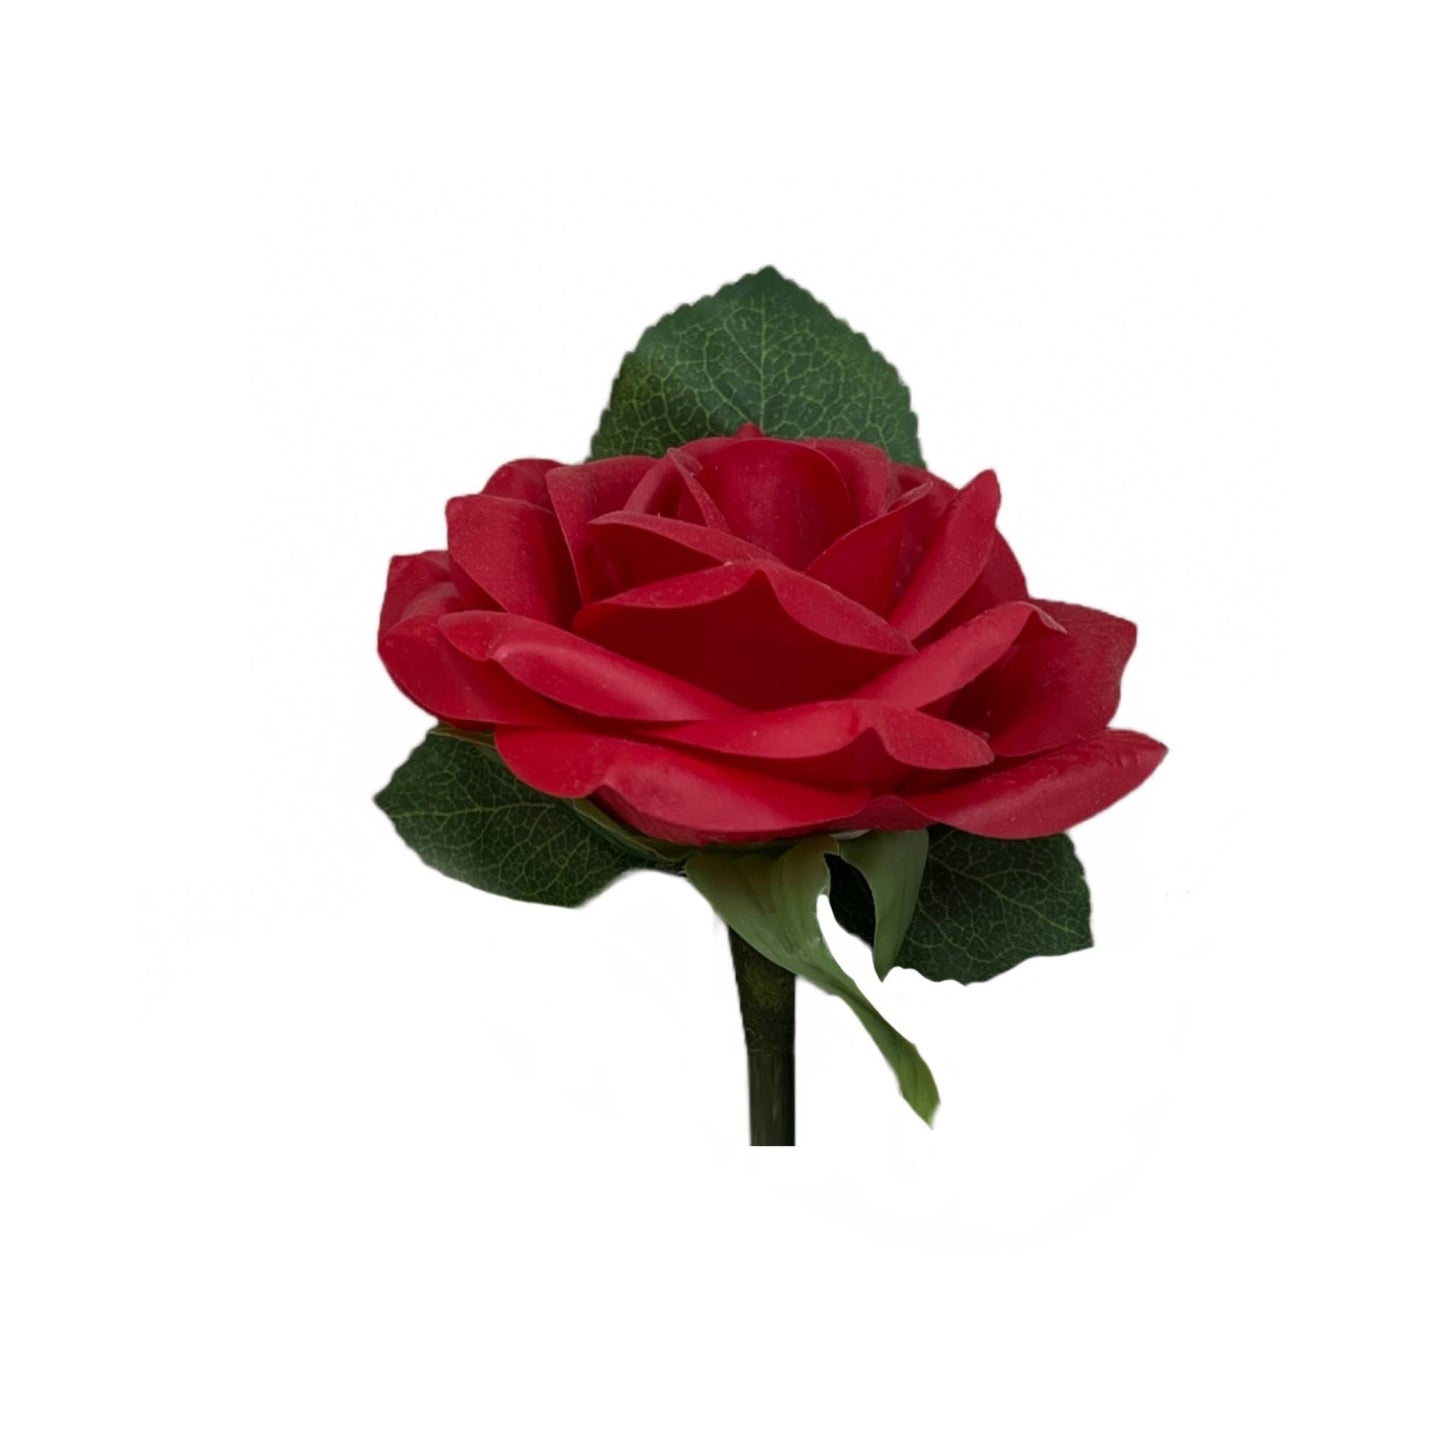 Elegant Faux Rose Boutonniere - Sophisticated Touch for Formal Events